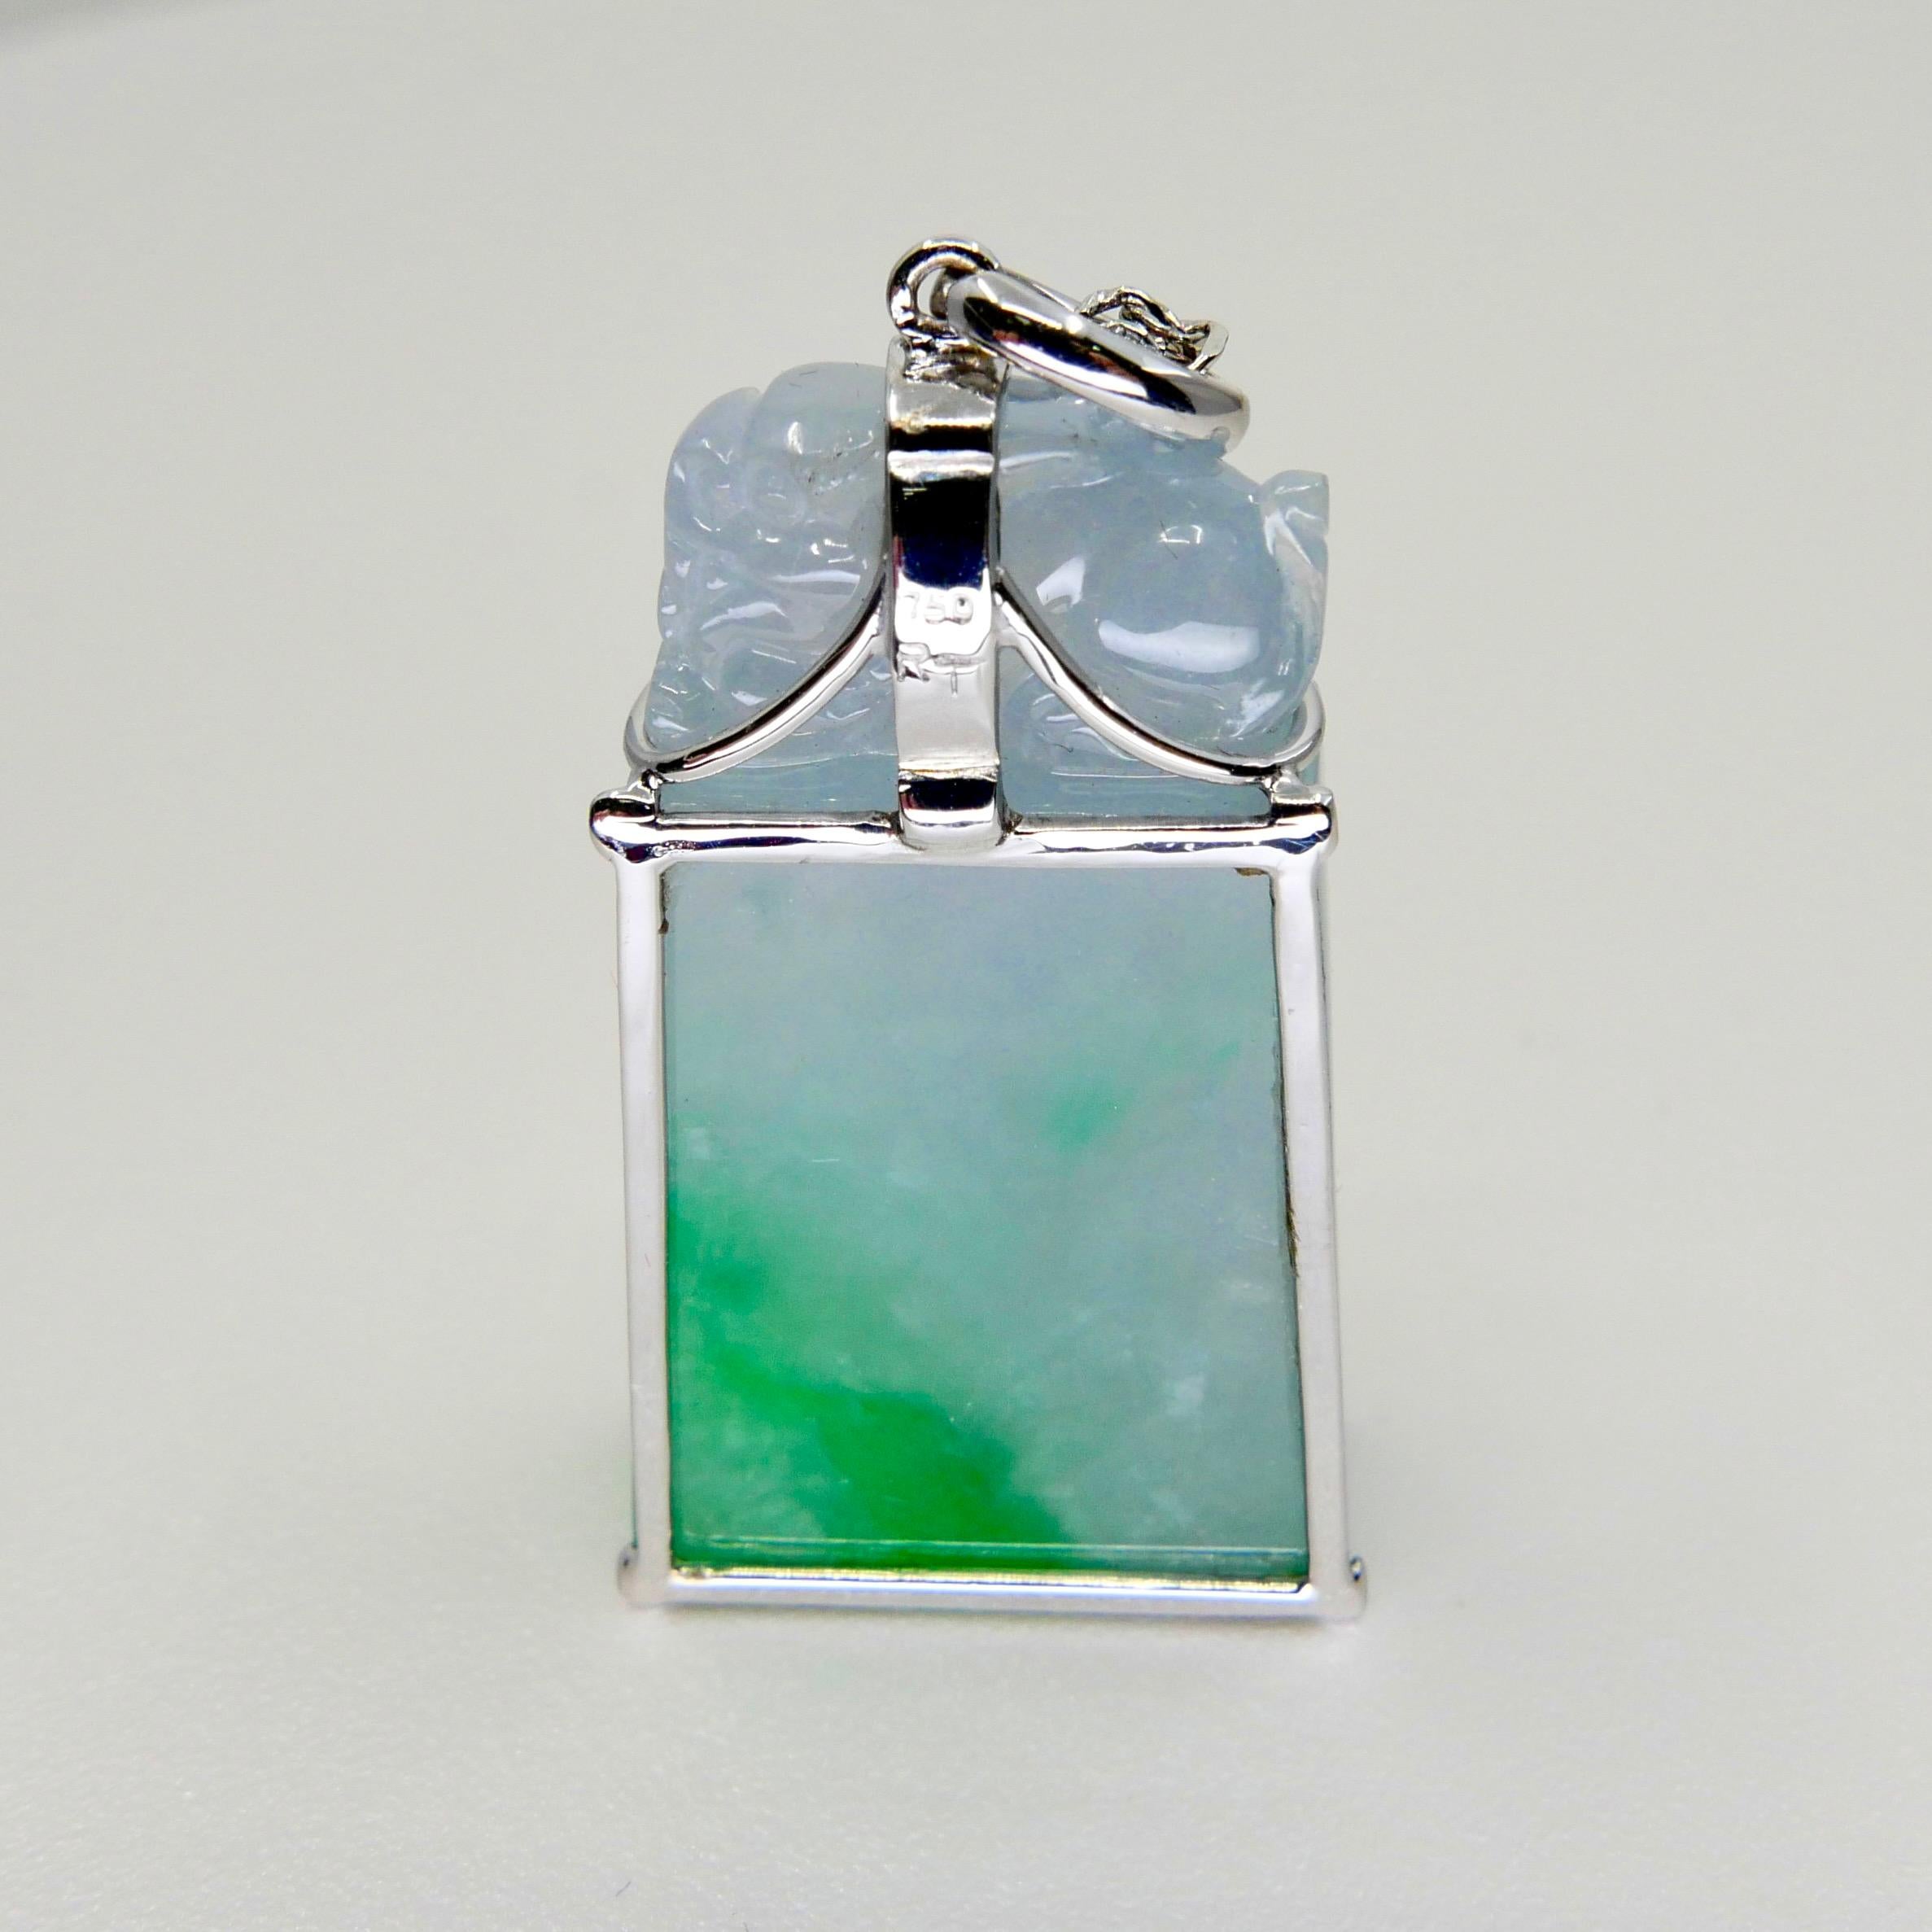 Rough Cut Certified 56.96cts Jadeite Pendant, Patches of Imperial Green, Brings Good Luck